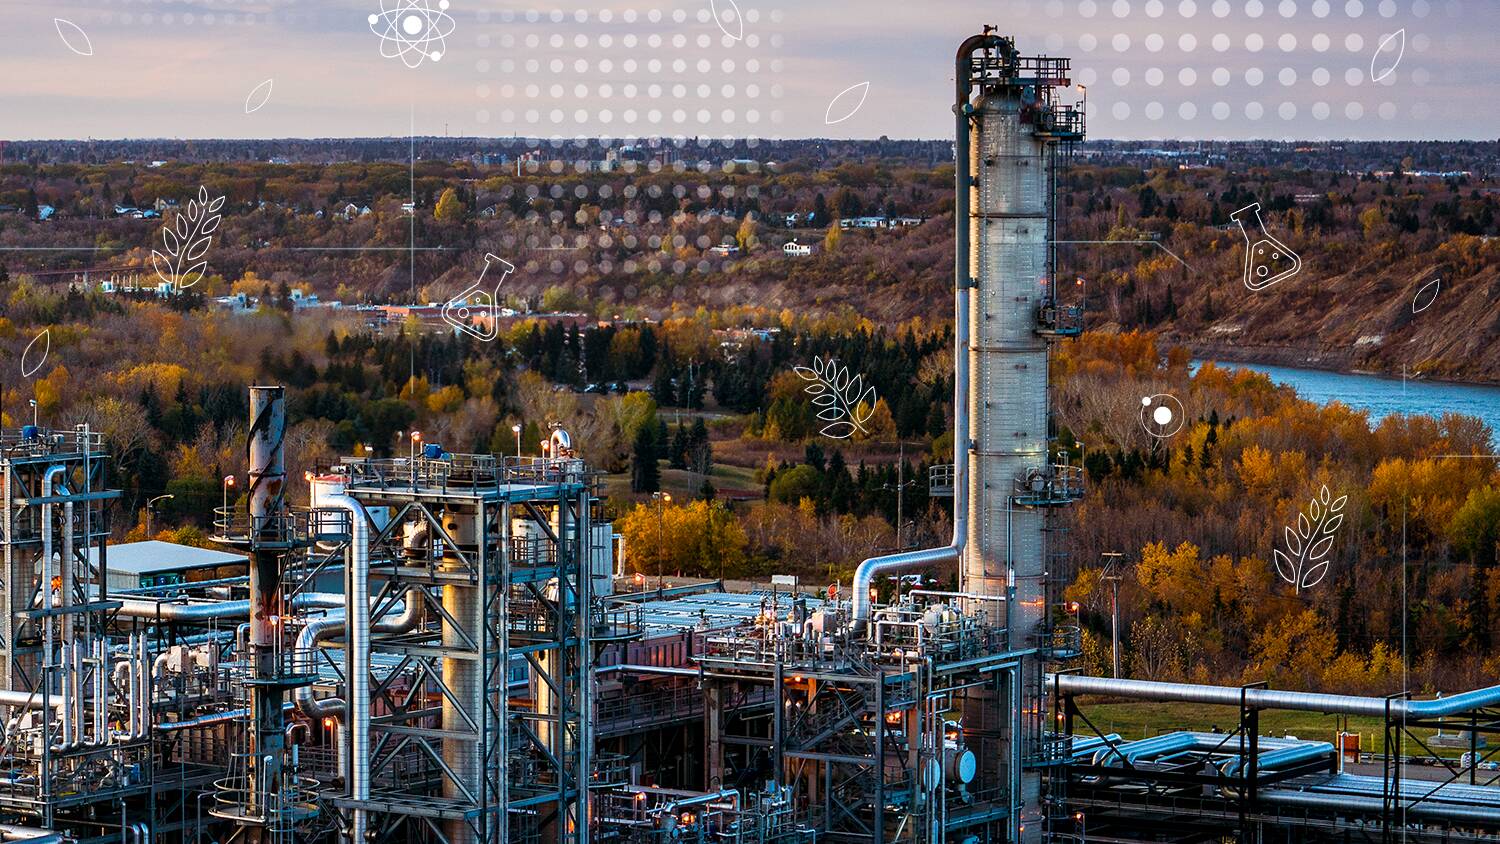 Imperial Oil’s Strathcona Refinery in Alberta, Canada surrounded by fall colored trees